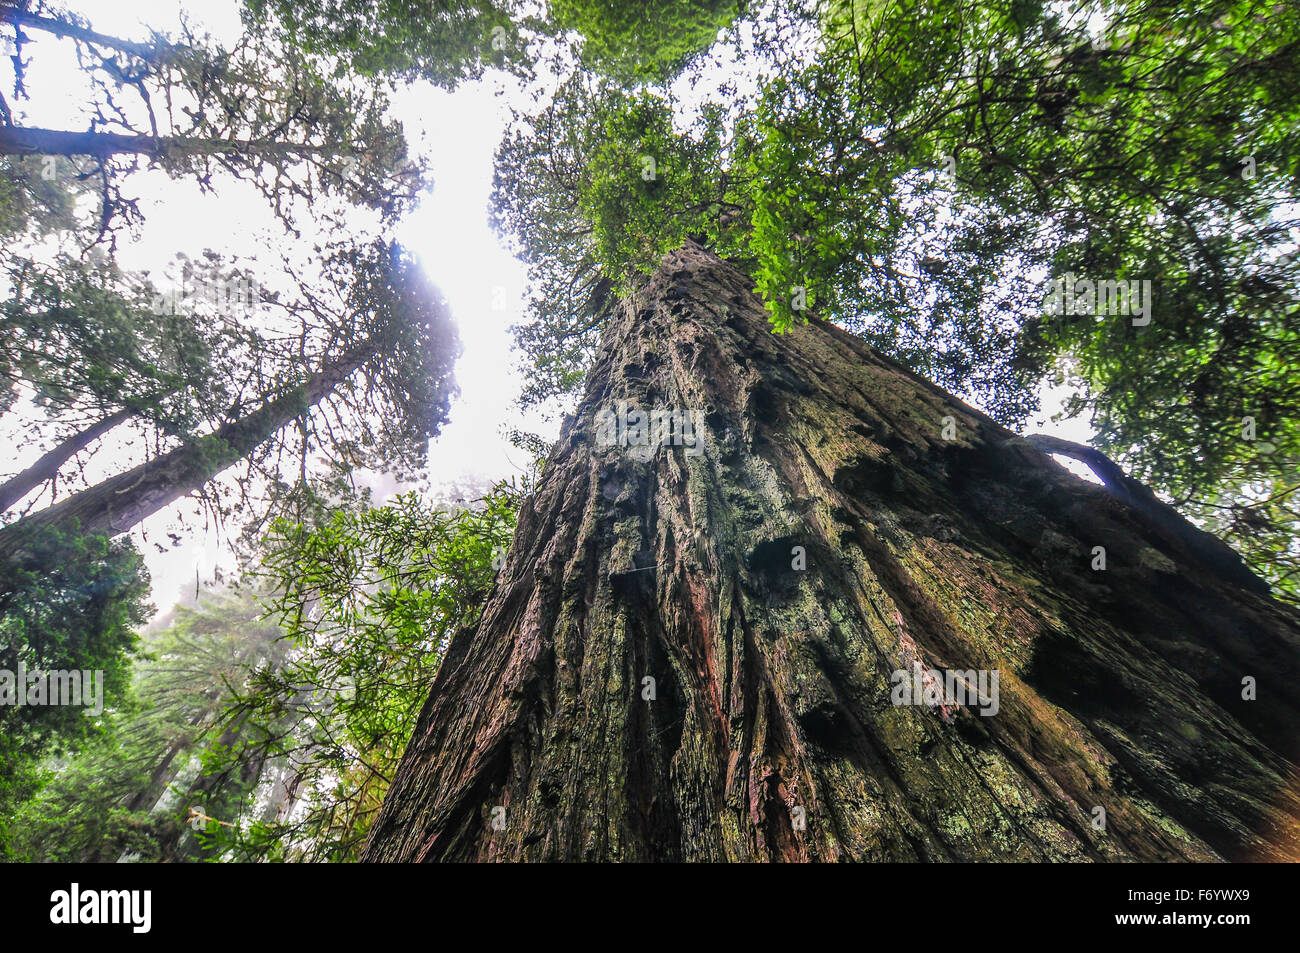 Gigantic Sequoia trees in Redwood National park with his beautiful fauna and flora Stock Photo